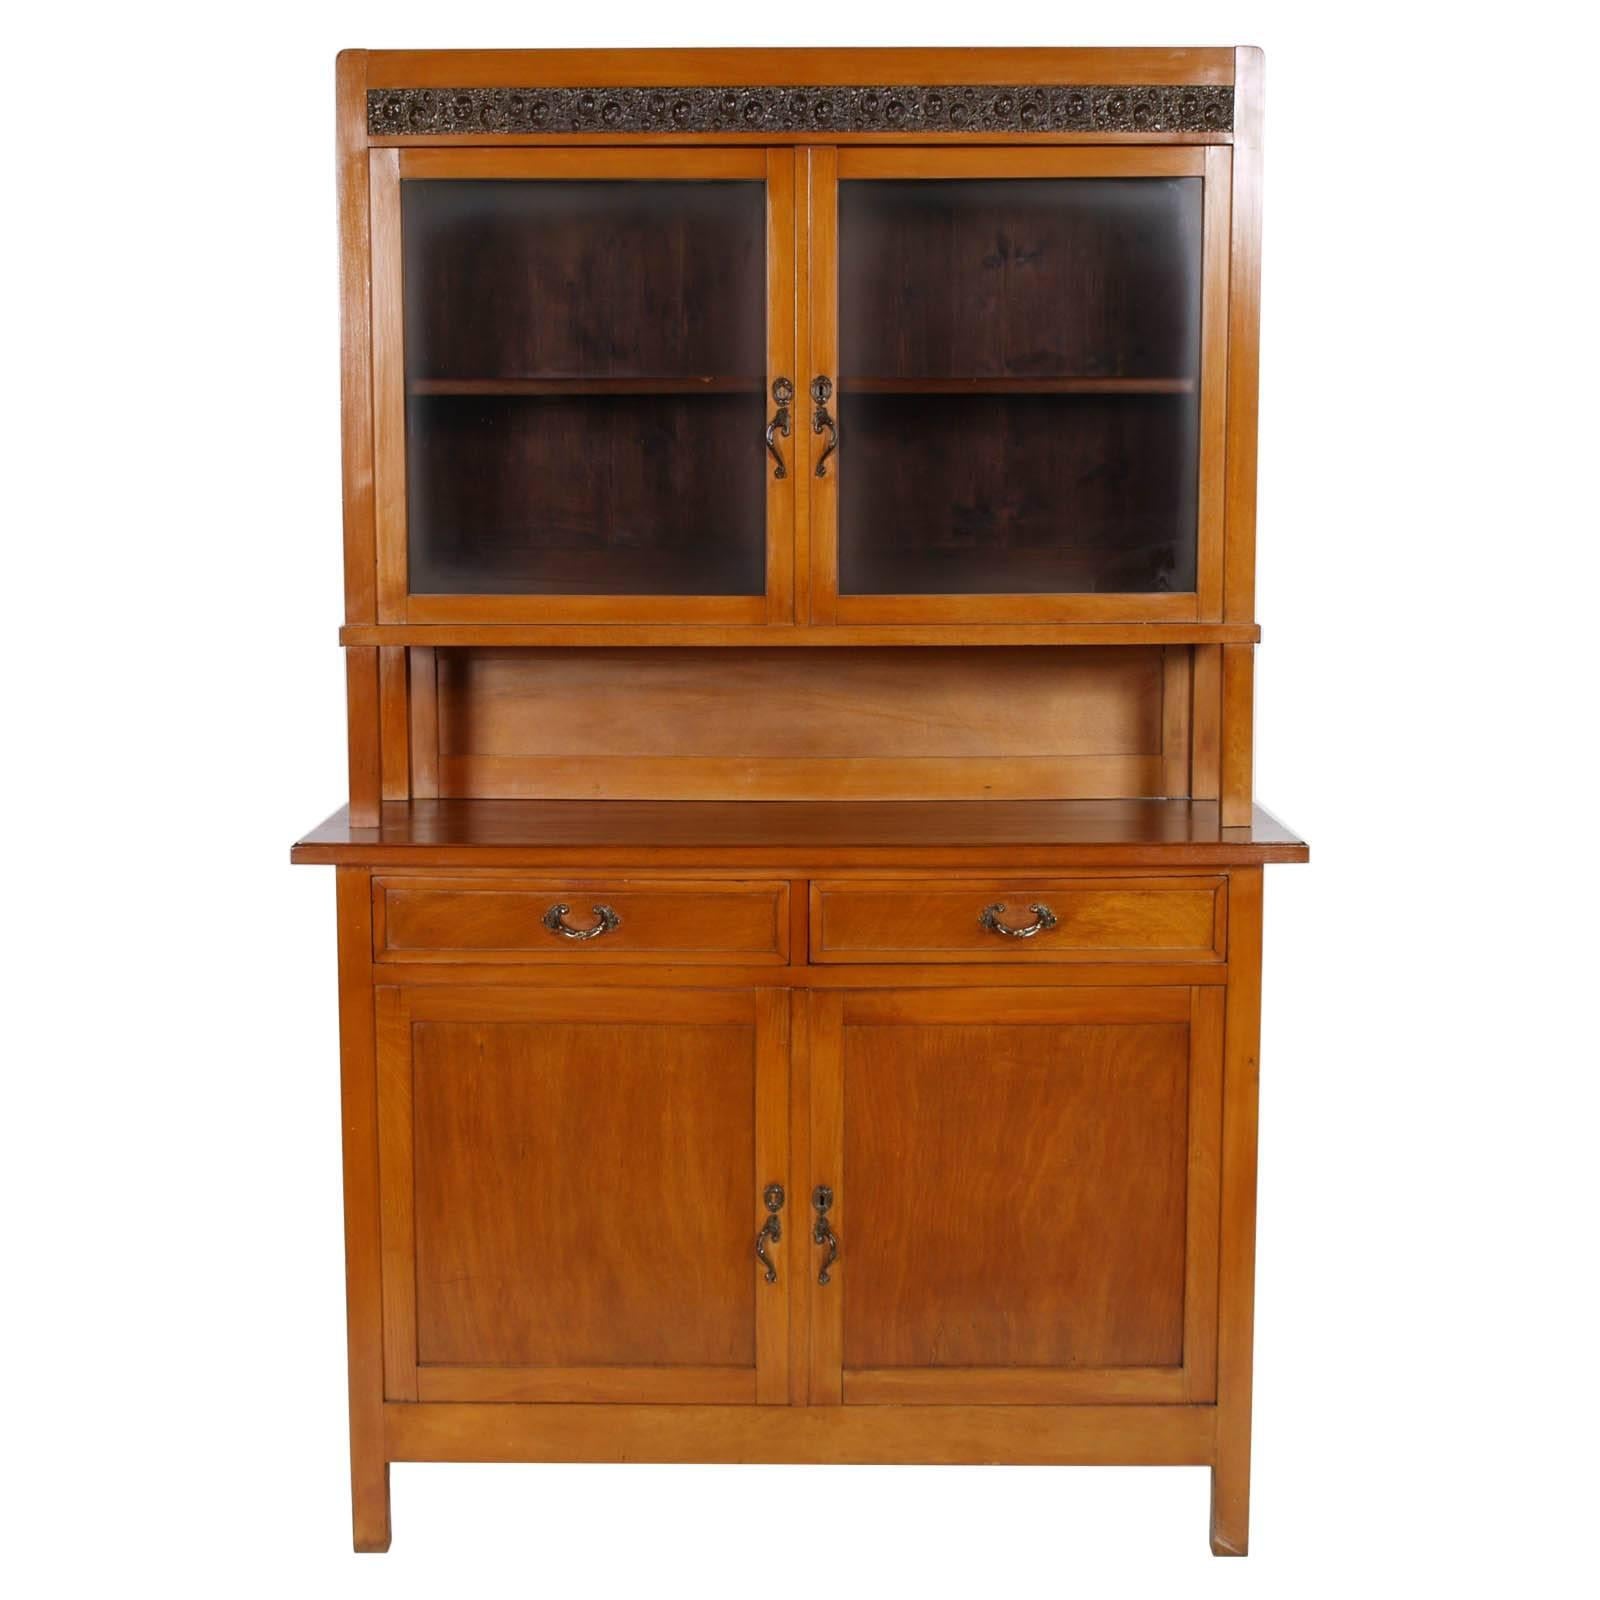 Early 20th century, Country Art Nouveau credenza with display cabinet in massive cherrywood , restored and wax polished; handles and display cabinet decoration, in bronze
Measures cm: H 205, W 142, D 52.